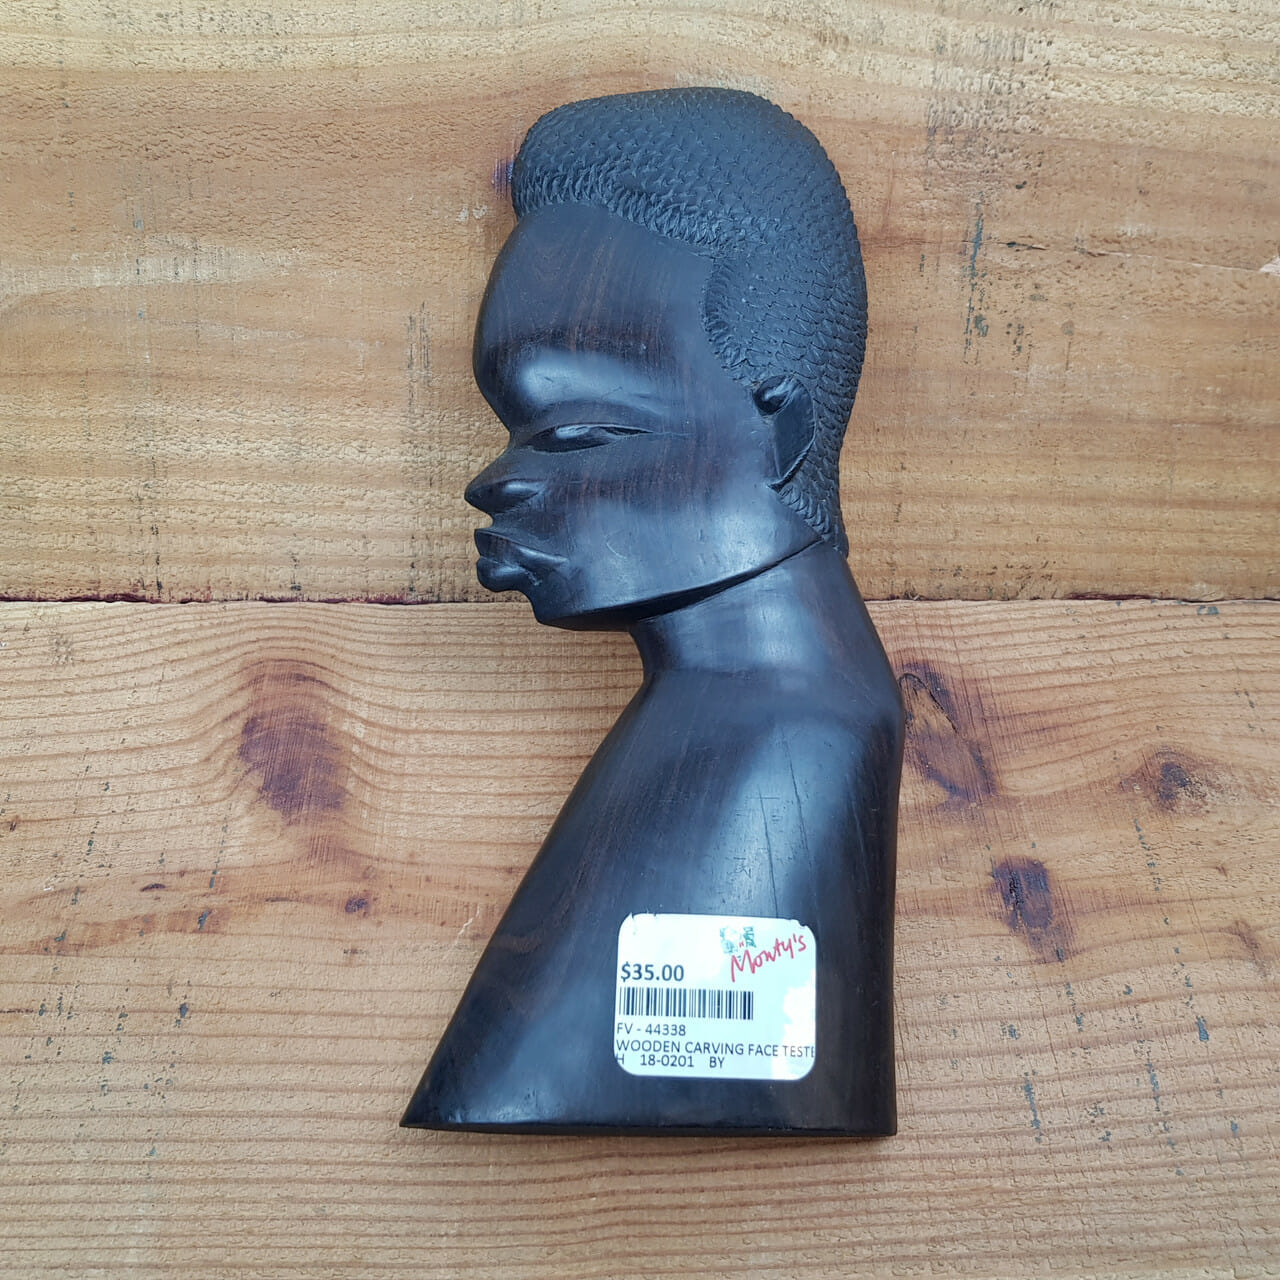 WOODEN CARVED FACE HEAD CARVING AFRICAN FIGURE #44338